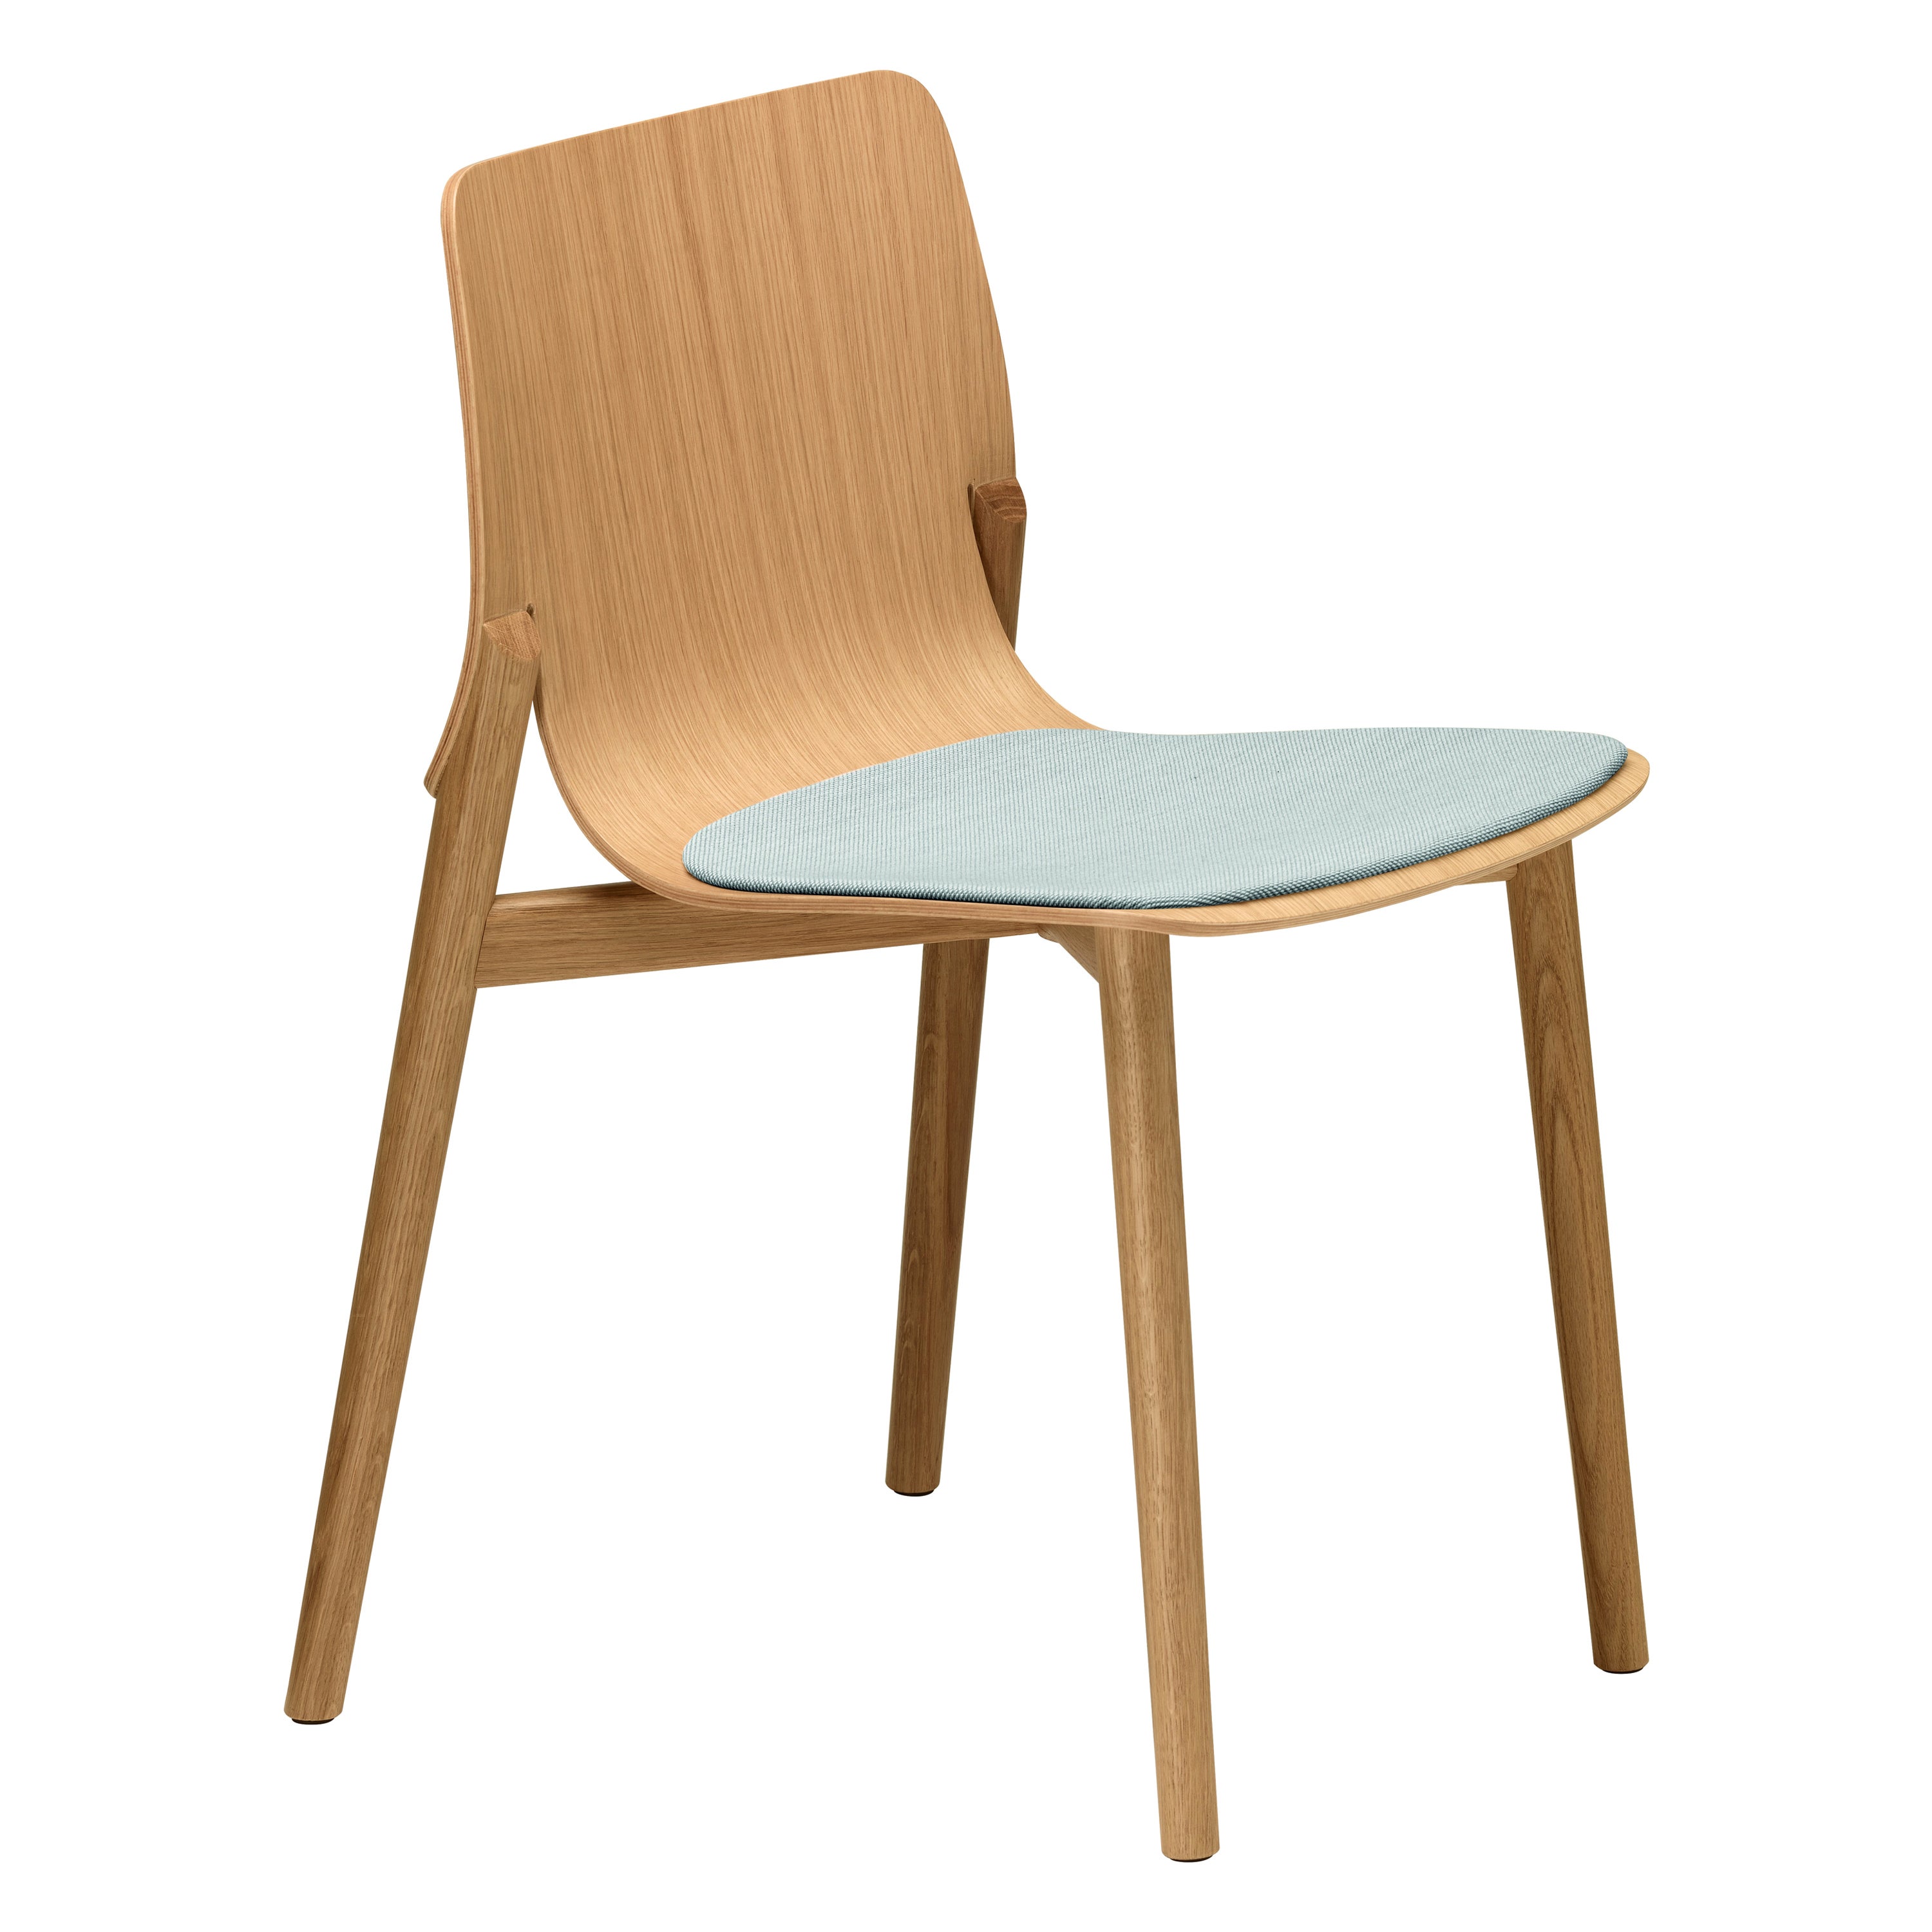 Alias 049 Kayak Chair with Grey Soft Seat & Natural Oak Frame by Patrick Norguet For Sale